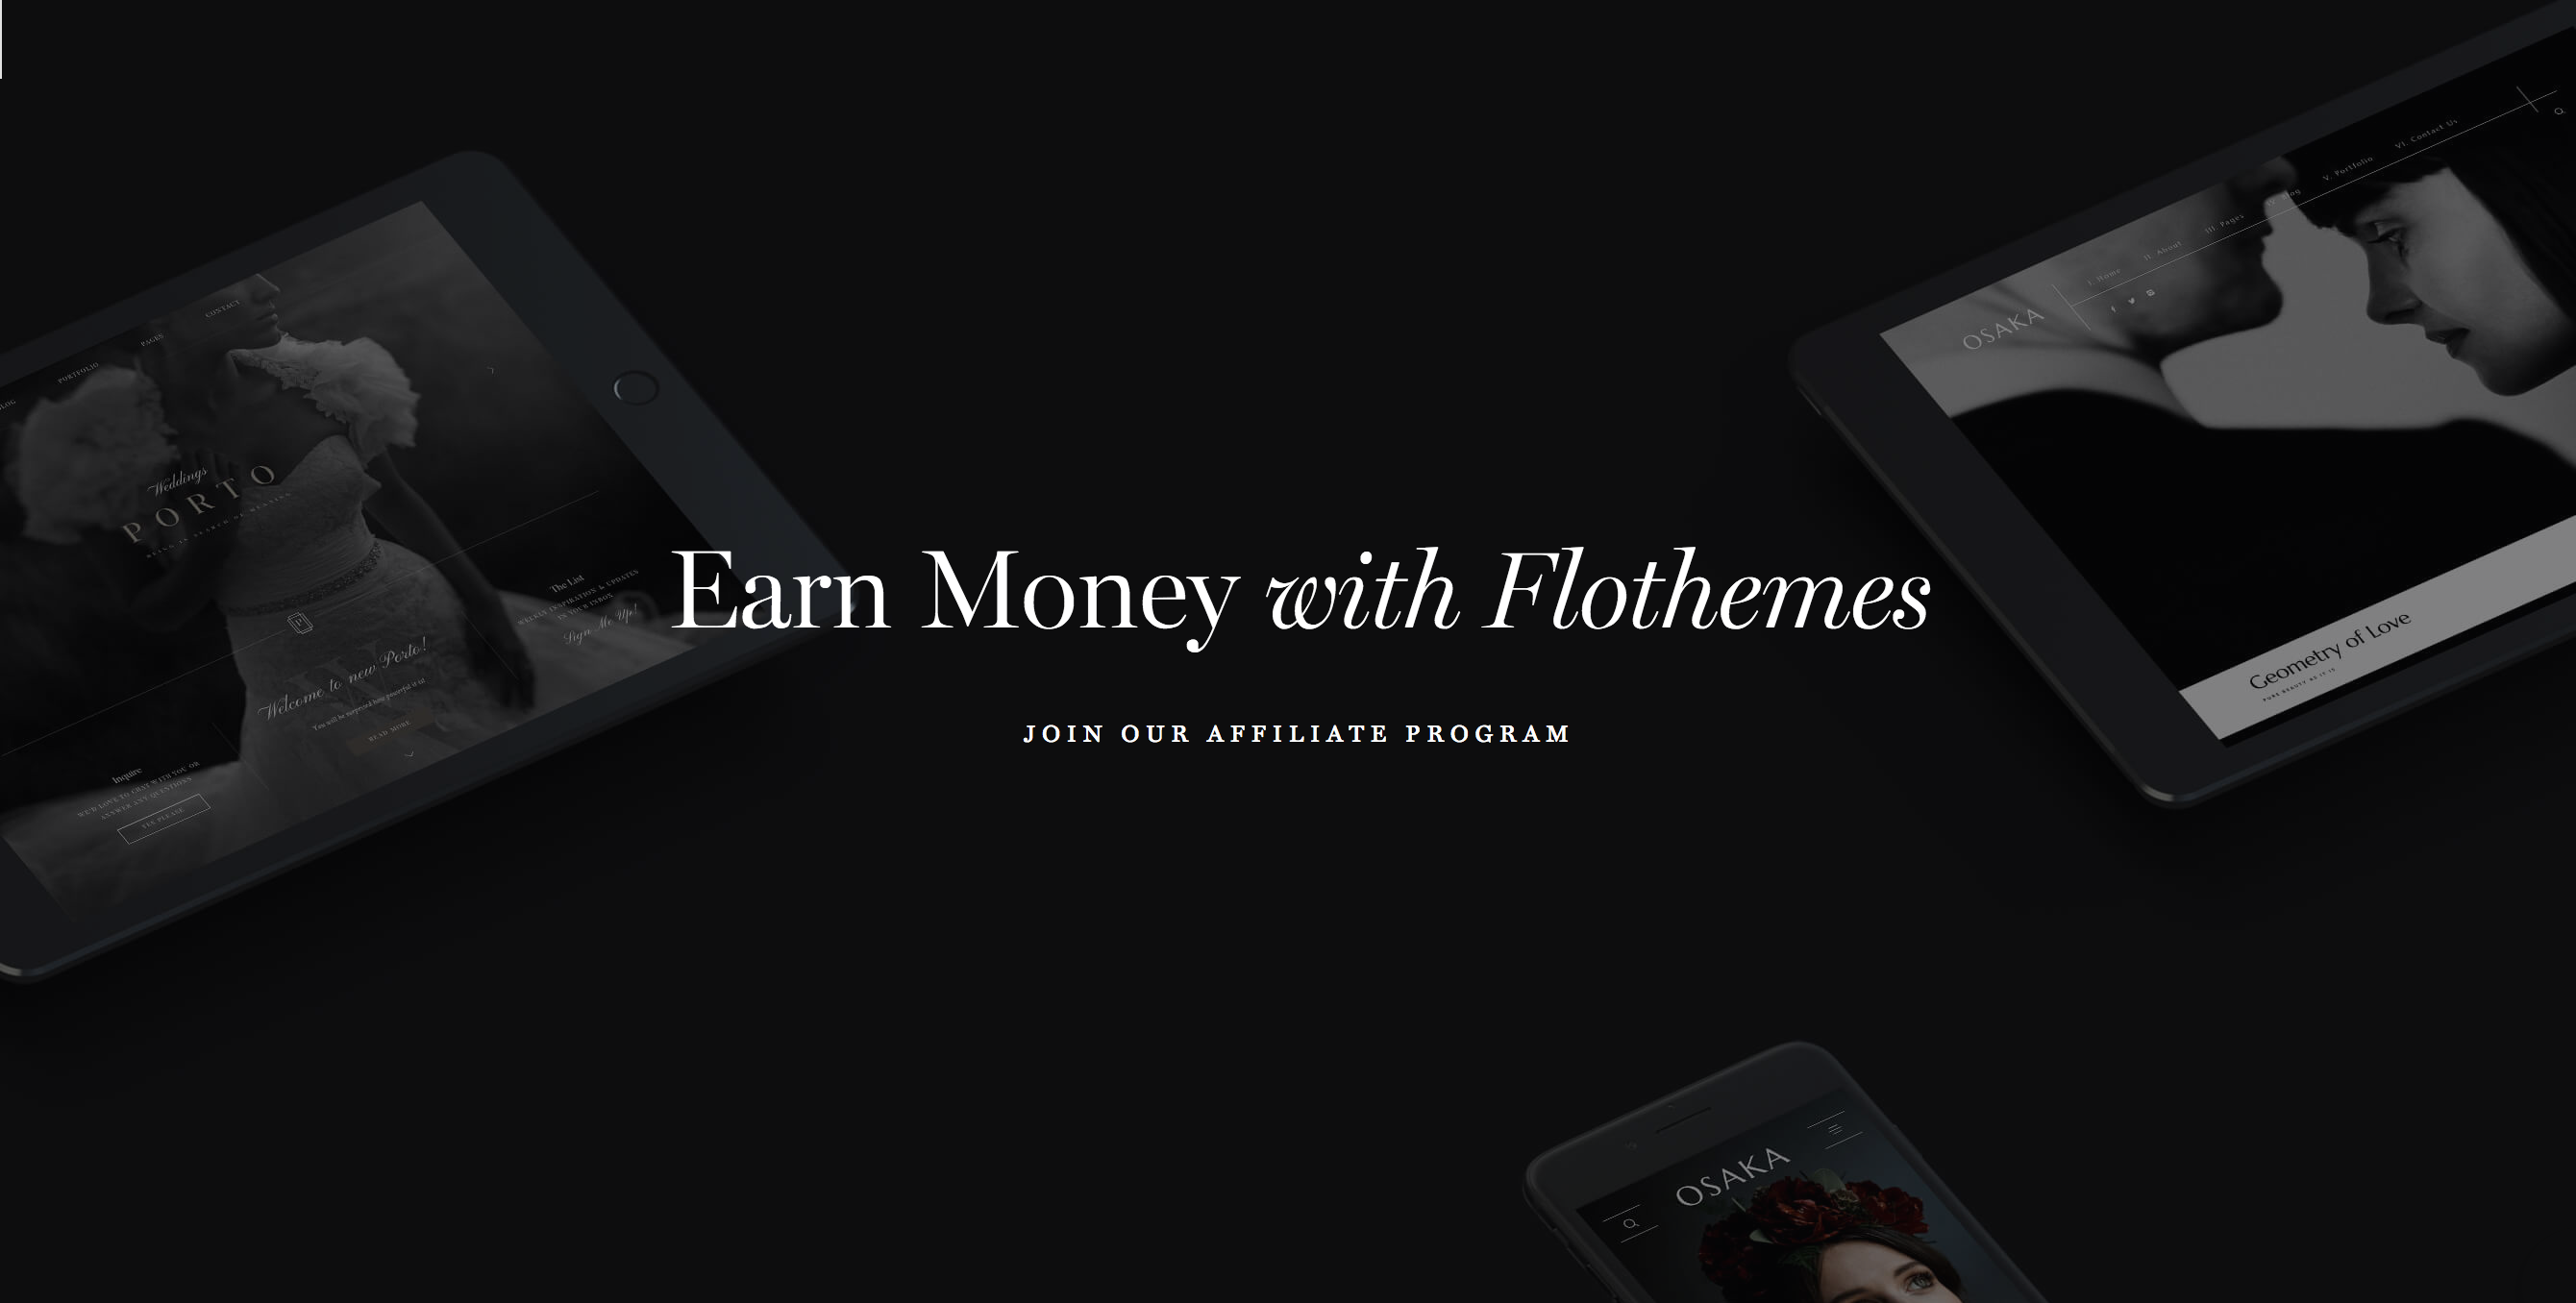 Flothemes - earn money by promoting unique websites for photographers